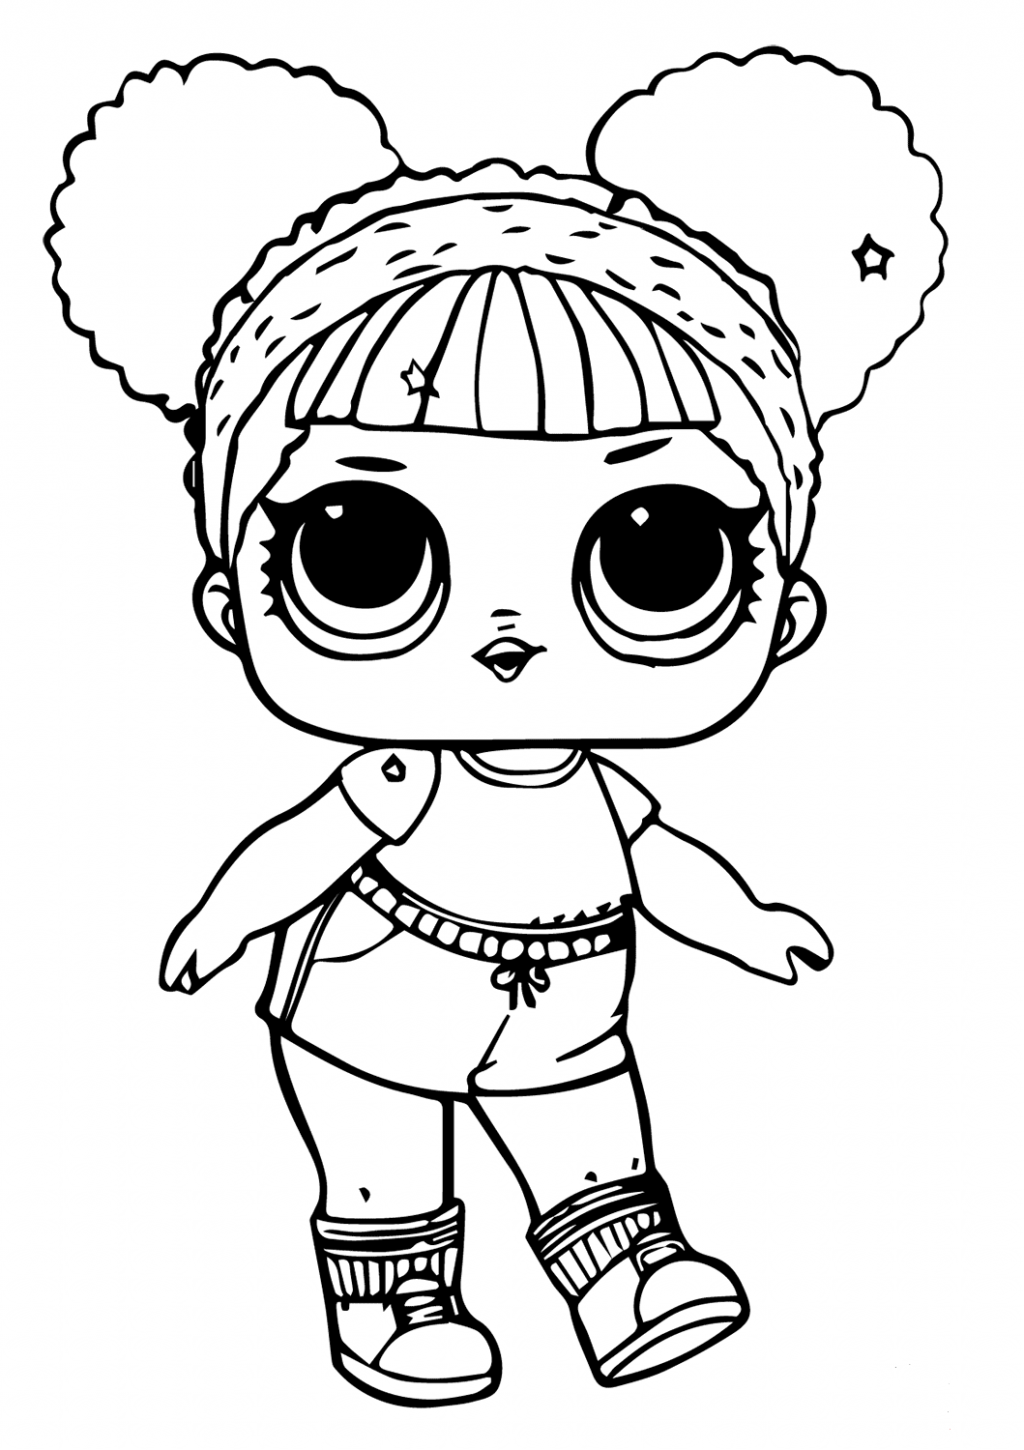 lol doll clipart black and white 10 free Cliparts | Download images on ...